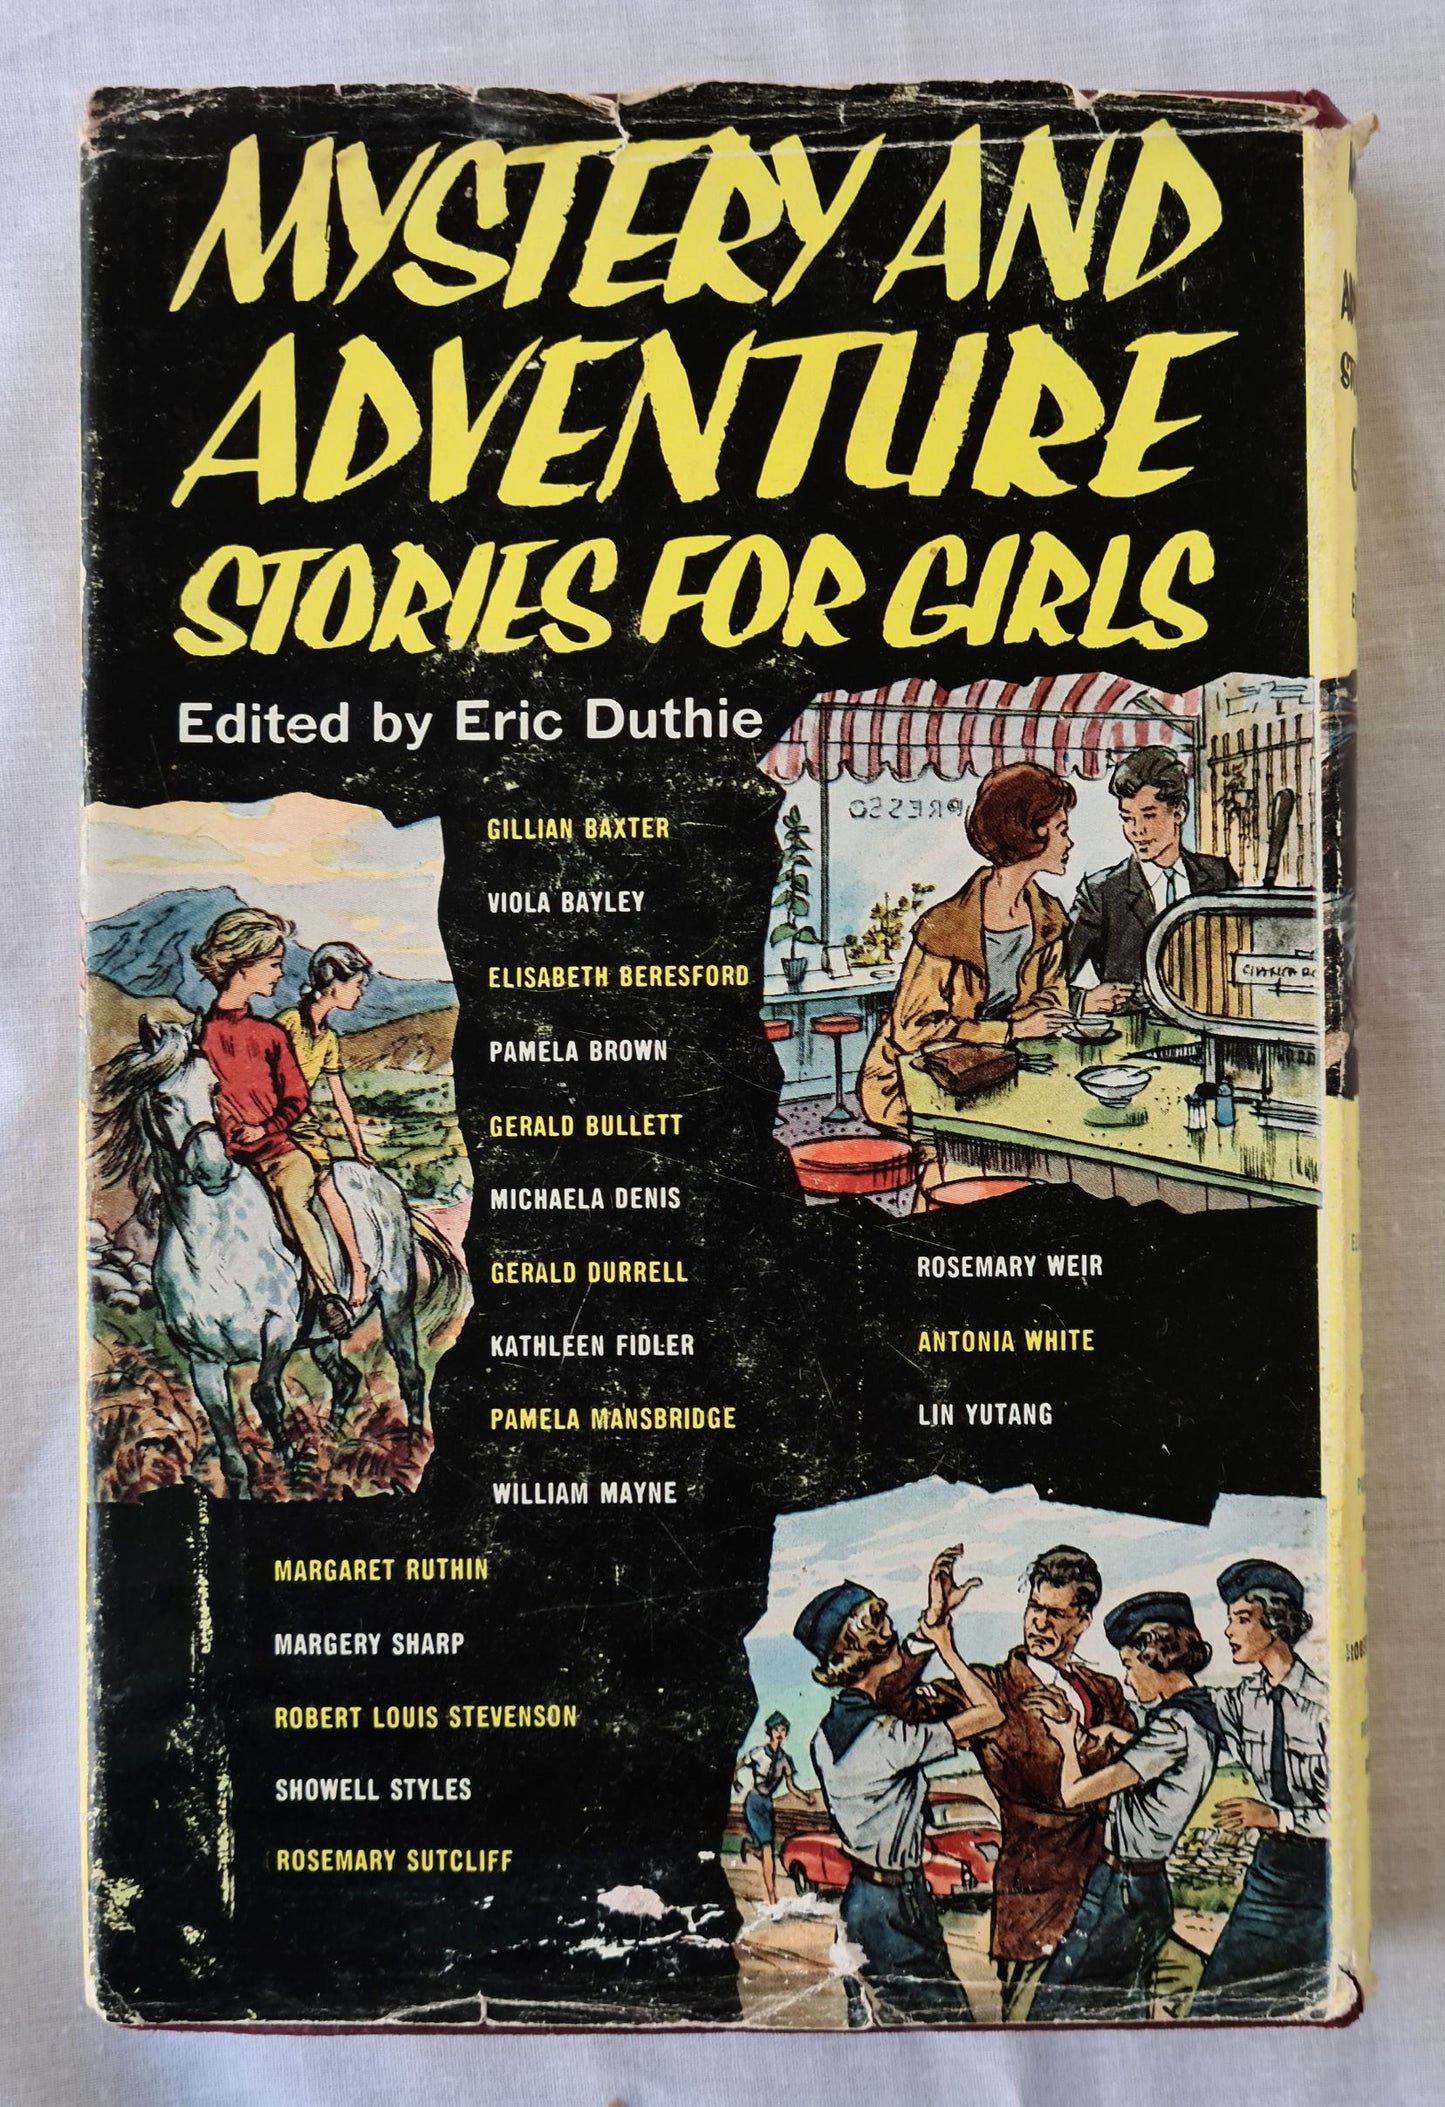 Mystery and Adventure Stories for Girls by Eric Duthie